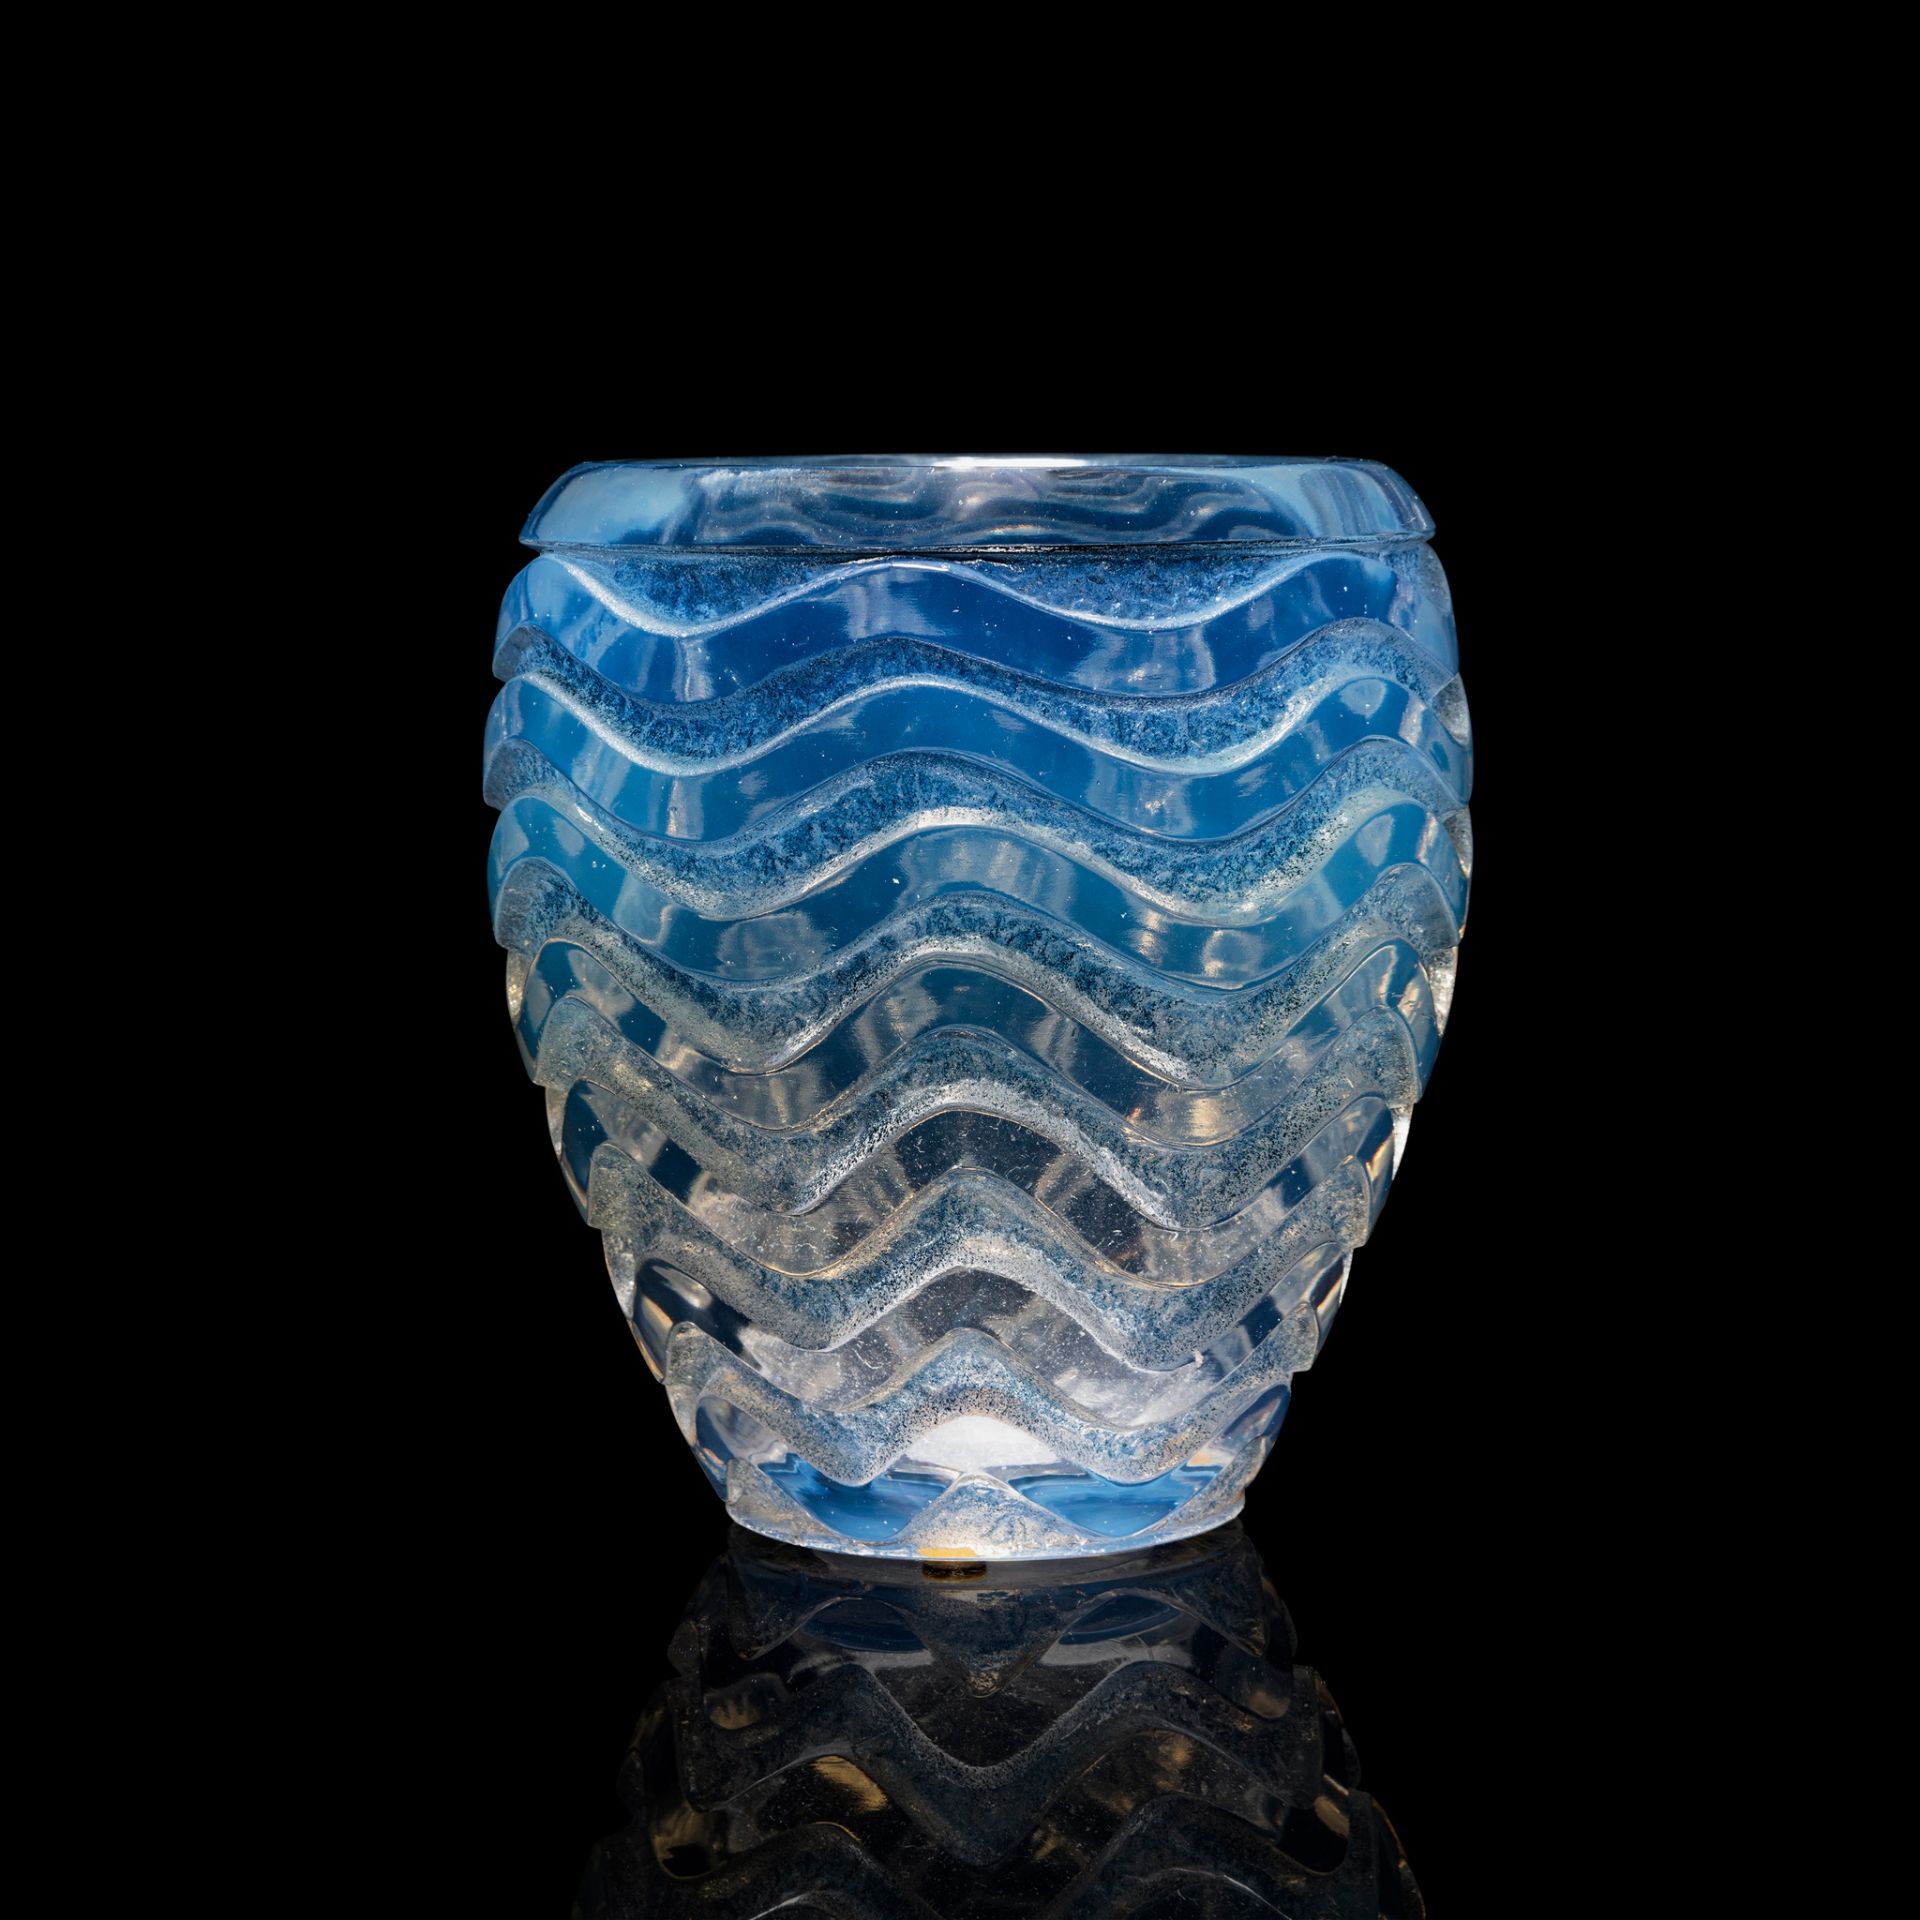 RENÉ LALIQUE (FRENCH 1860-1945) MEANDRES VASE, NO. 10-876 - Image 2 of 2